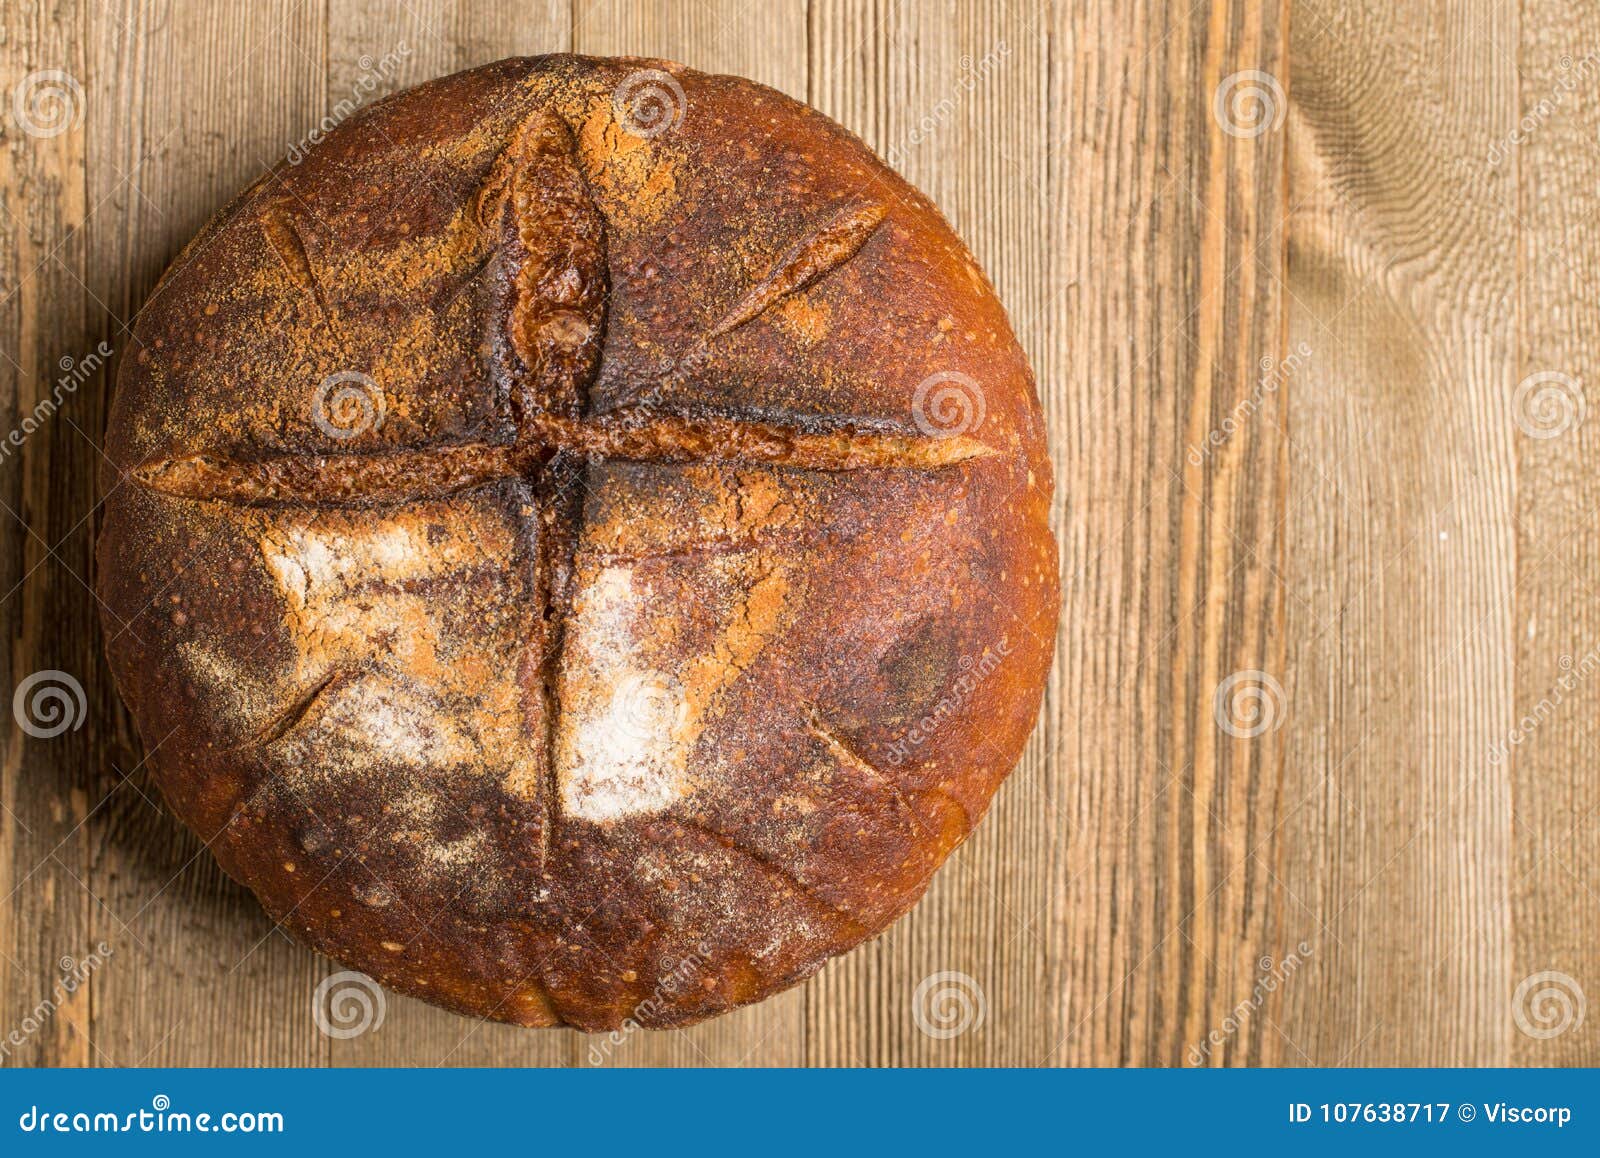 Homemade Bread with Cross stock image. Image of christian - 107638717